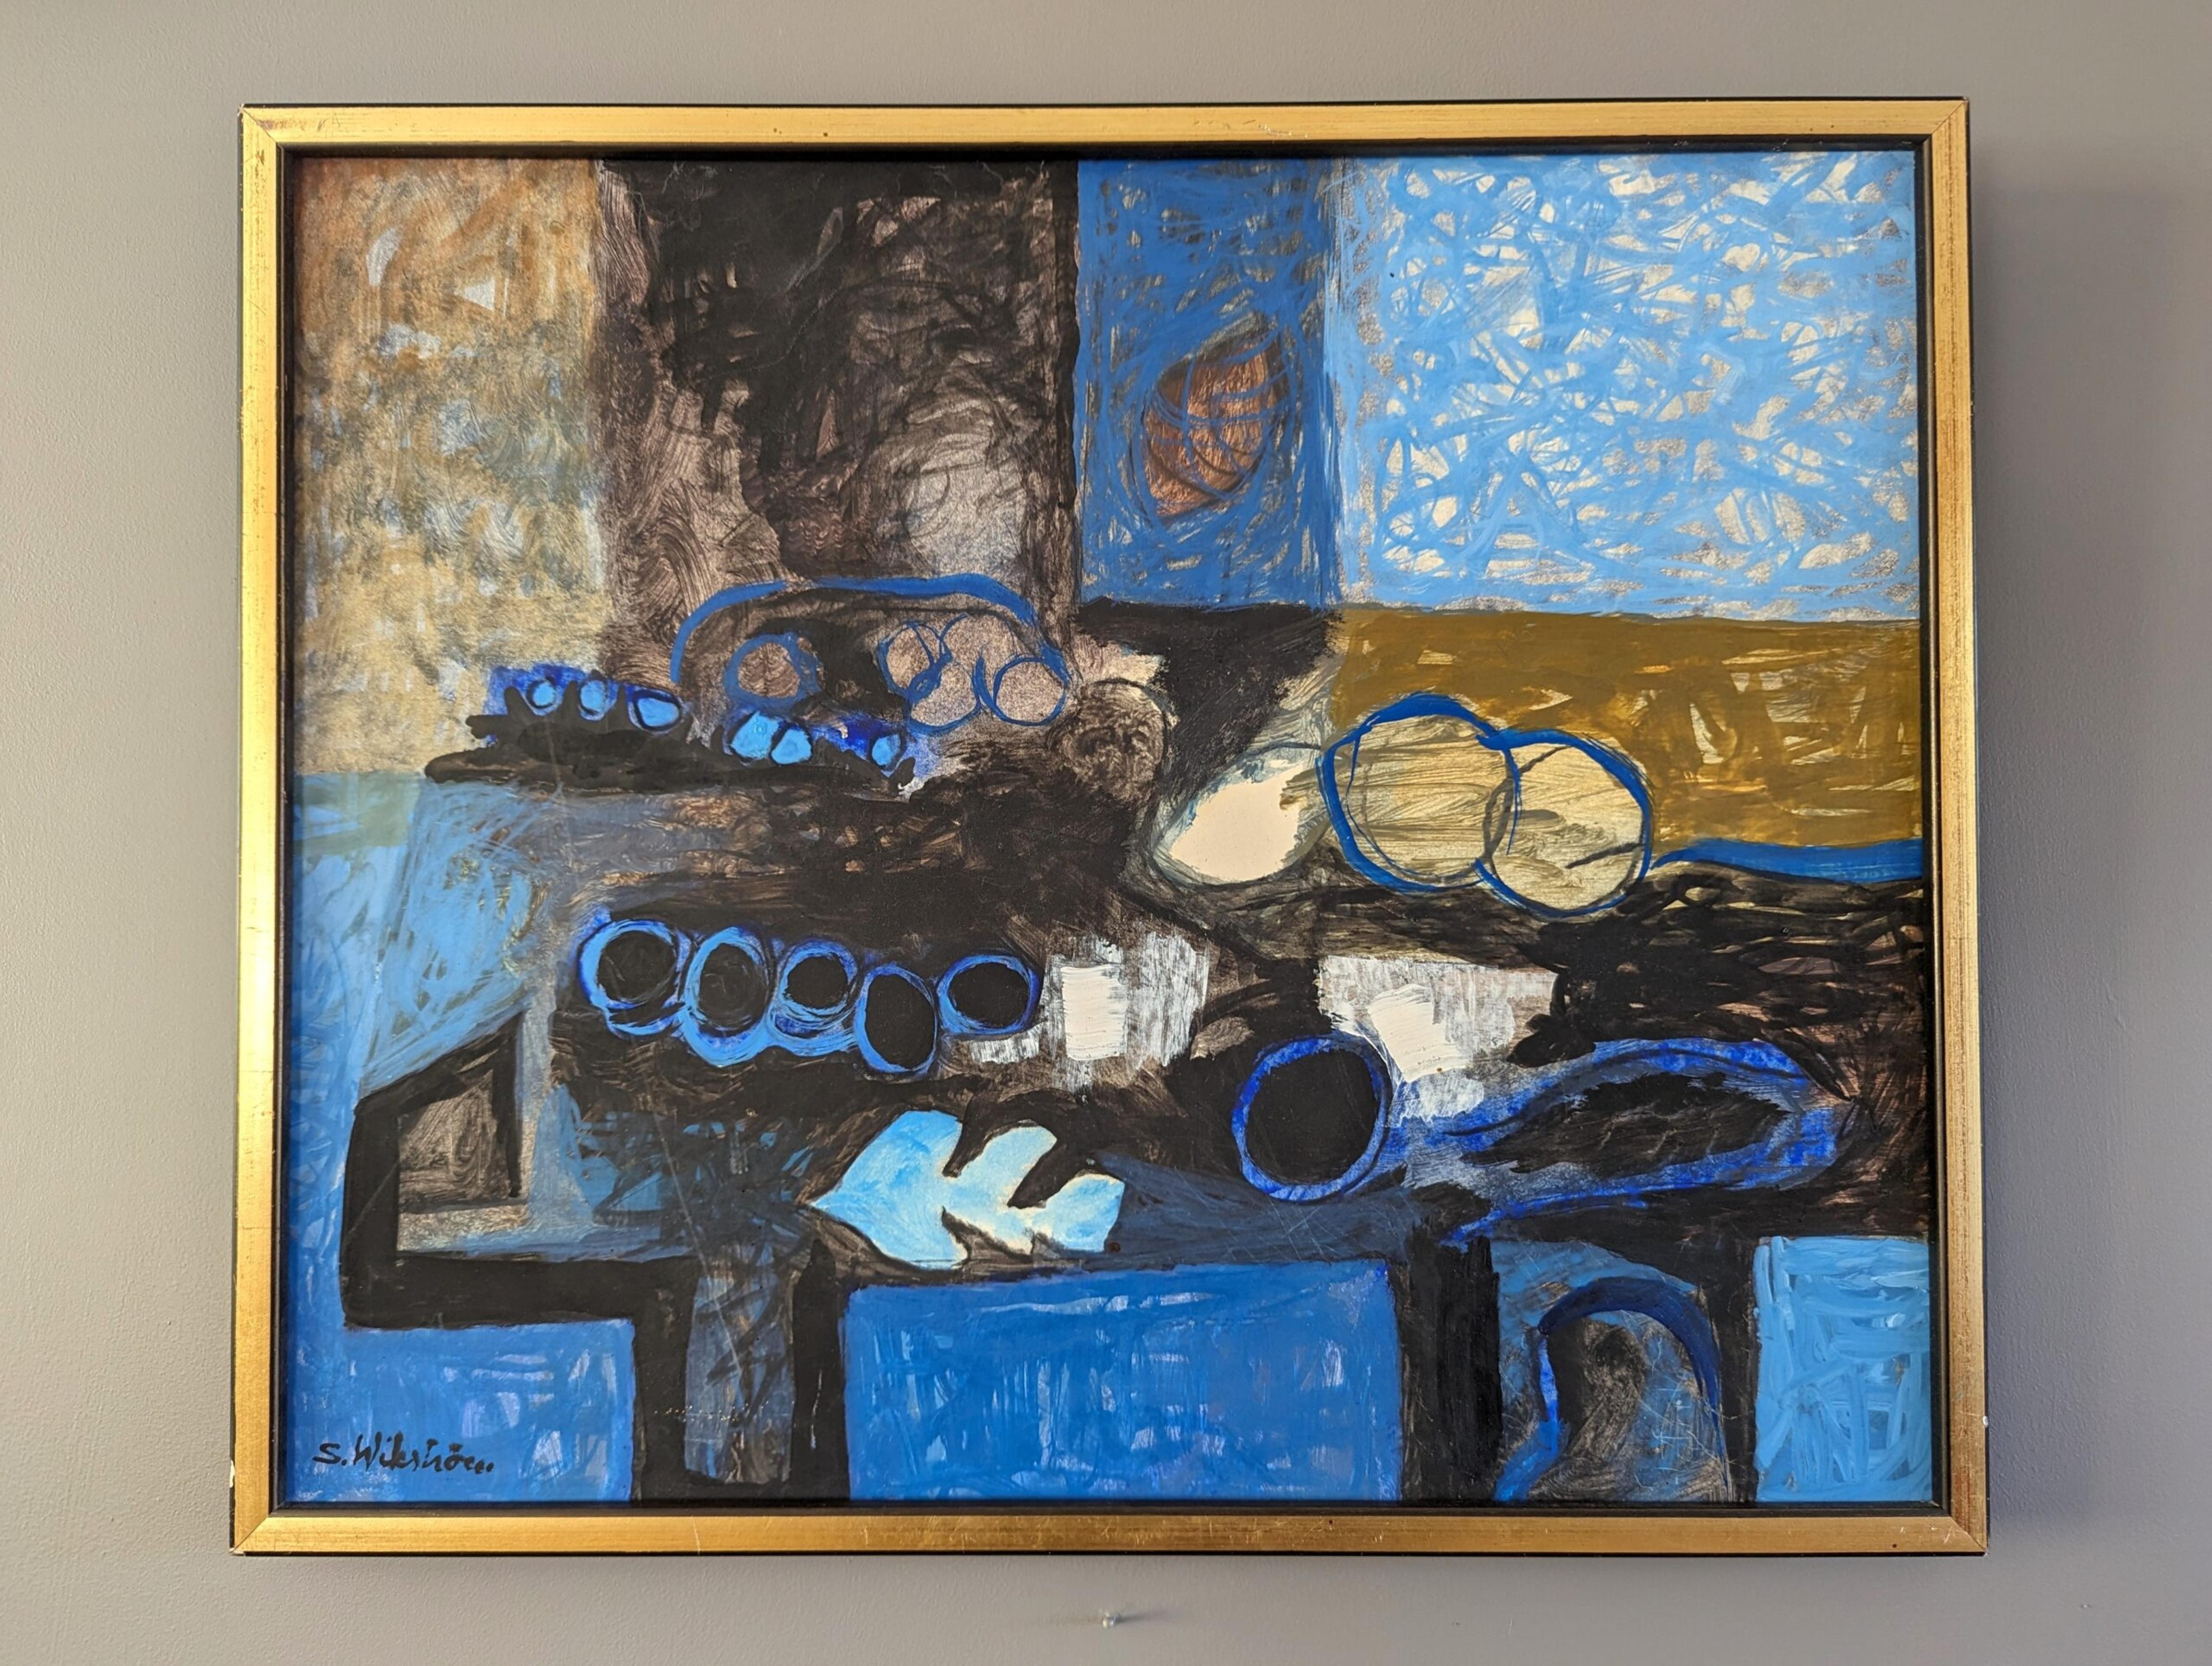 BLUEPRINT
Oil on Board
Size: 40 x 48 cm (including frame)

An expressive and energetic mid-century still life composition, executed in oil onto board.

The painting presents a black table adorned with an eclectic arrangement of objects, whose